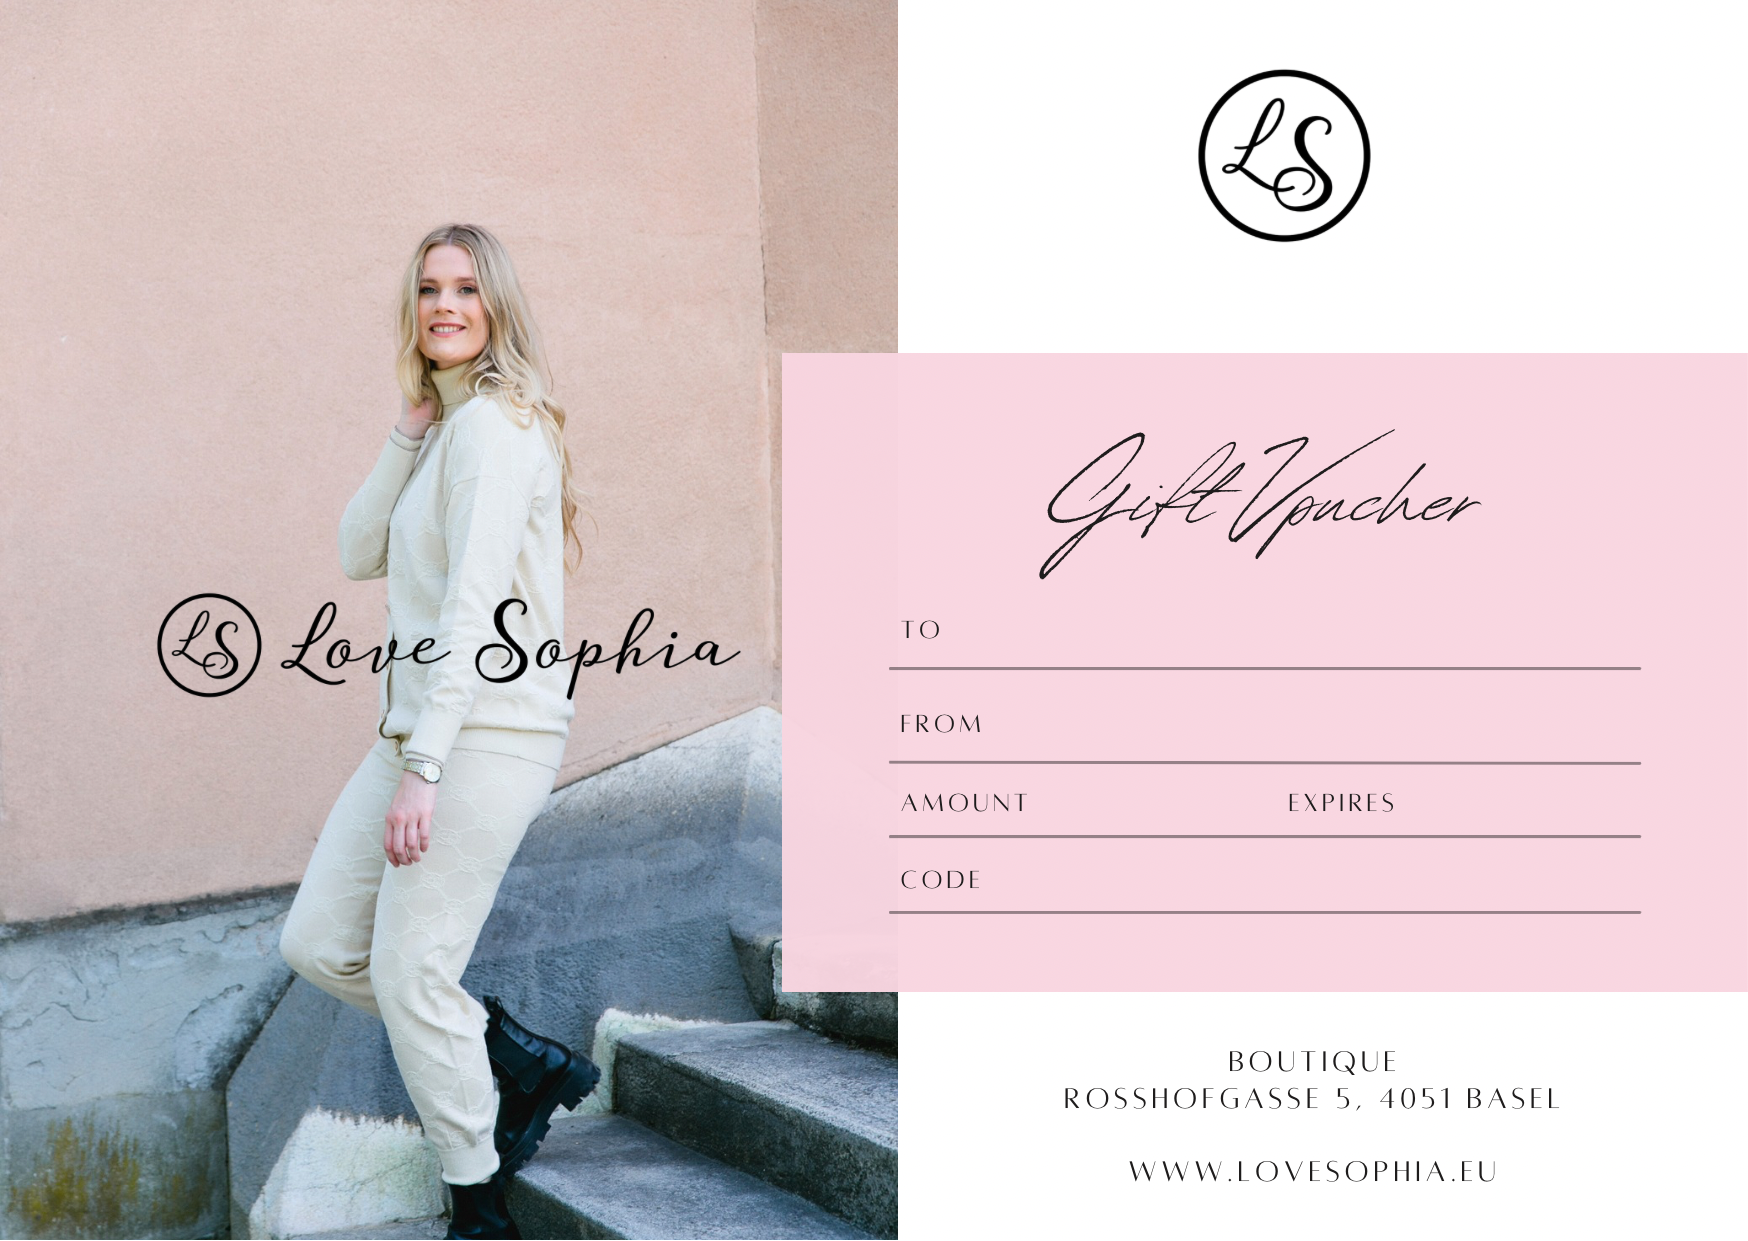 Love Sophia's gift voucher is a great birthday gift or for any occasion. - Love Sophia